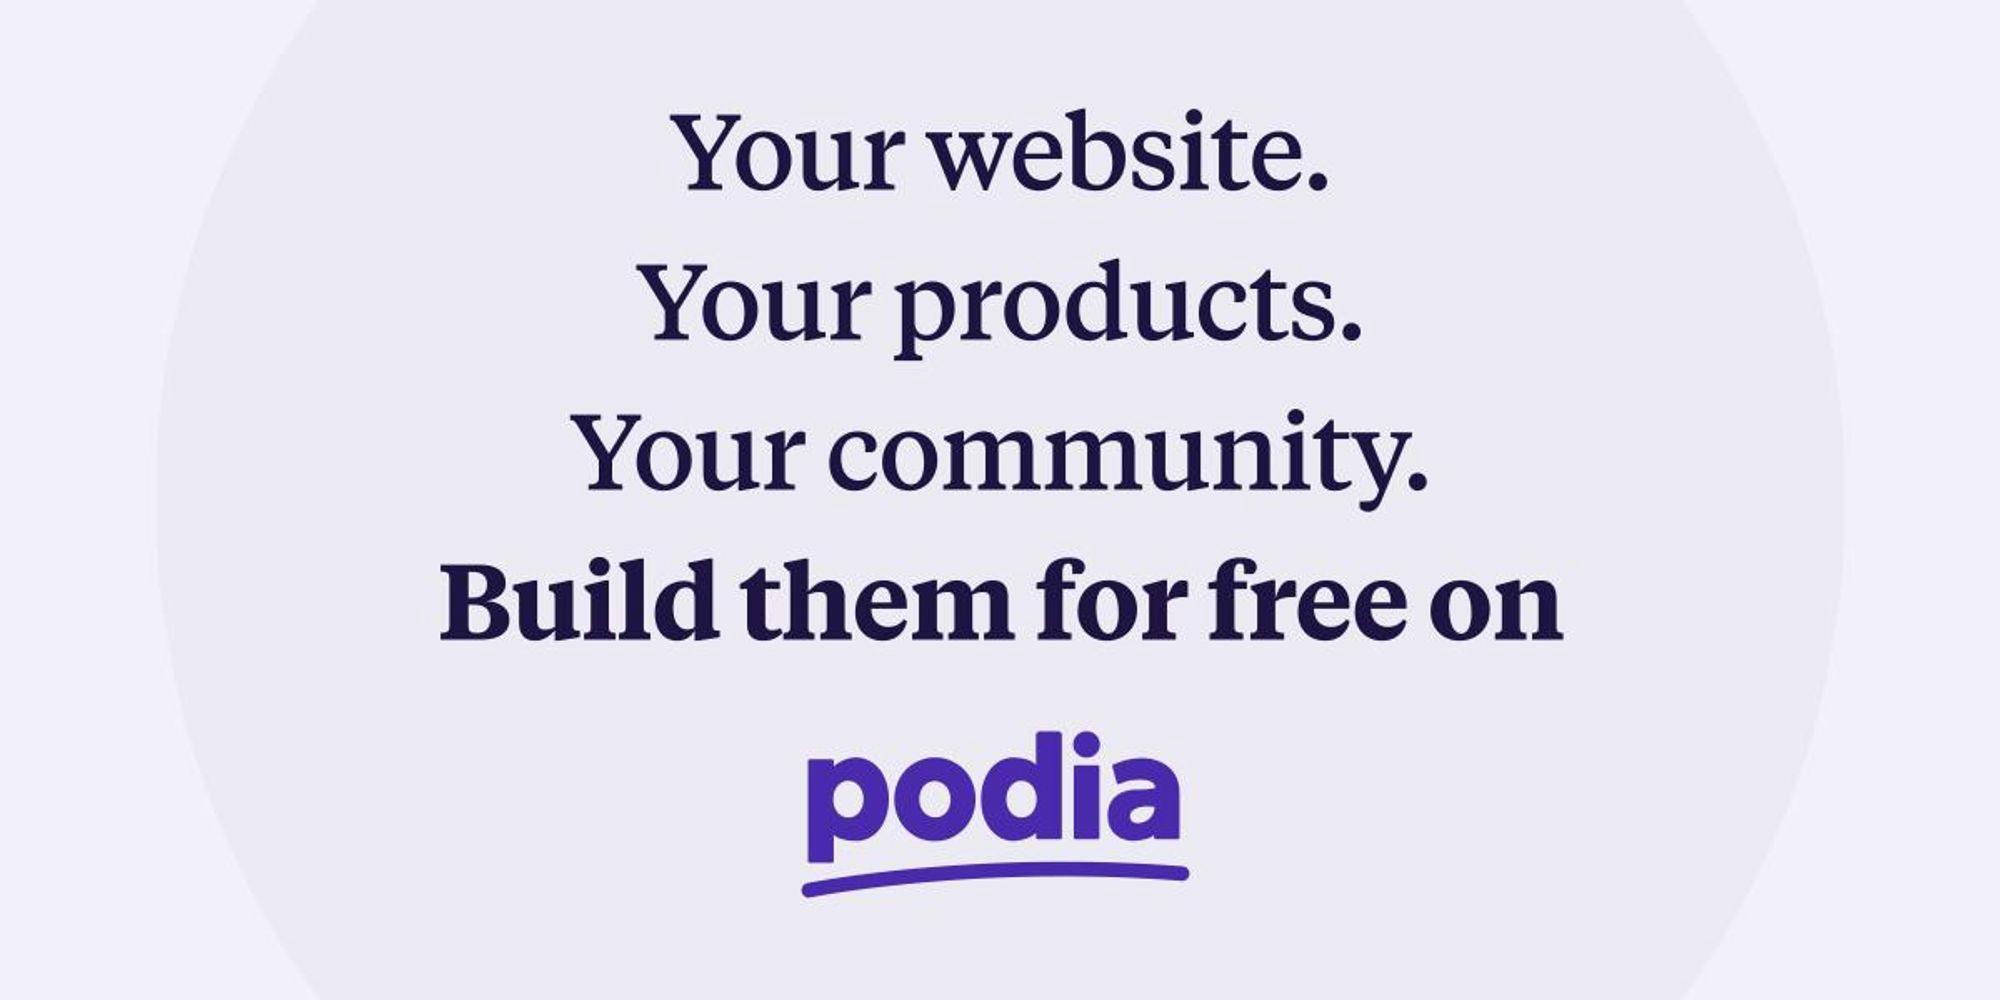 Podia - Get a free website. Sell products. Build your community.